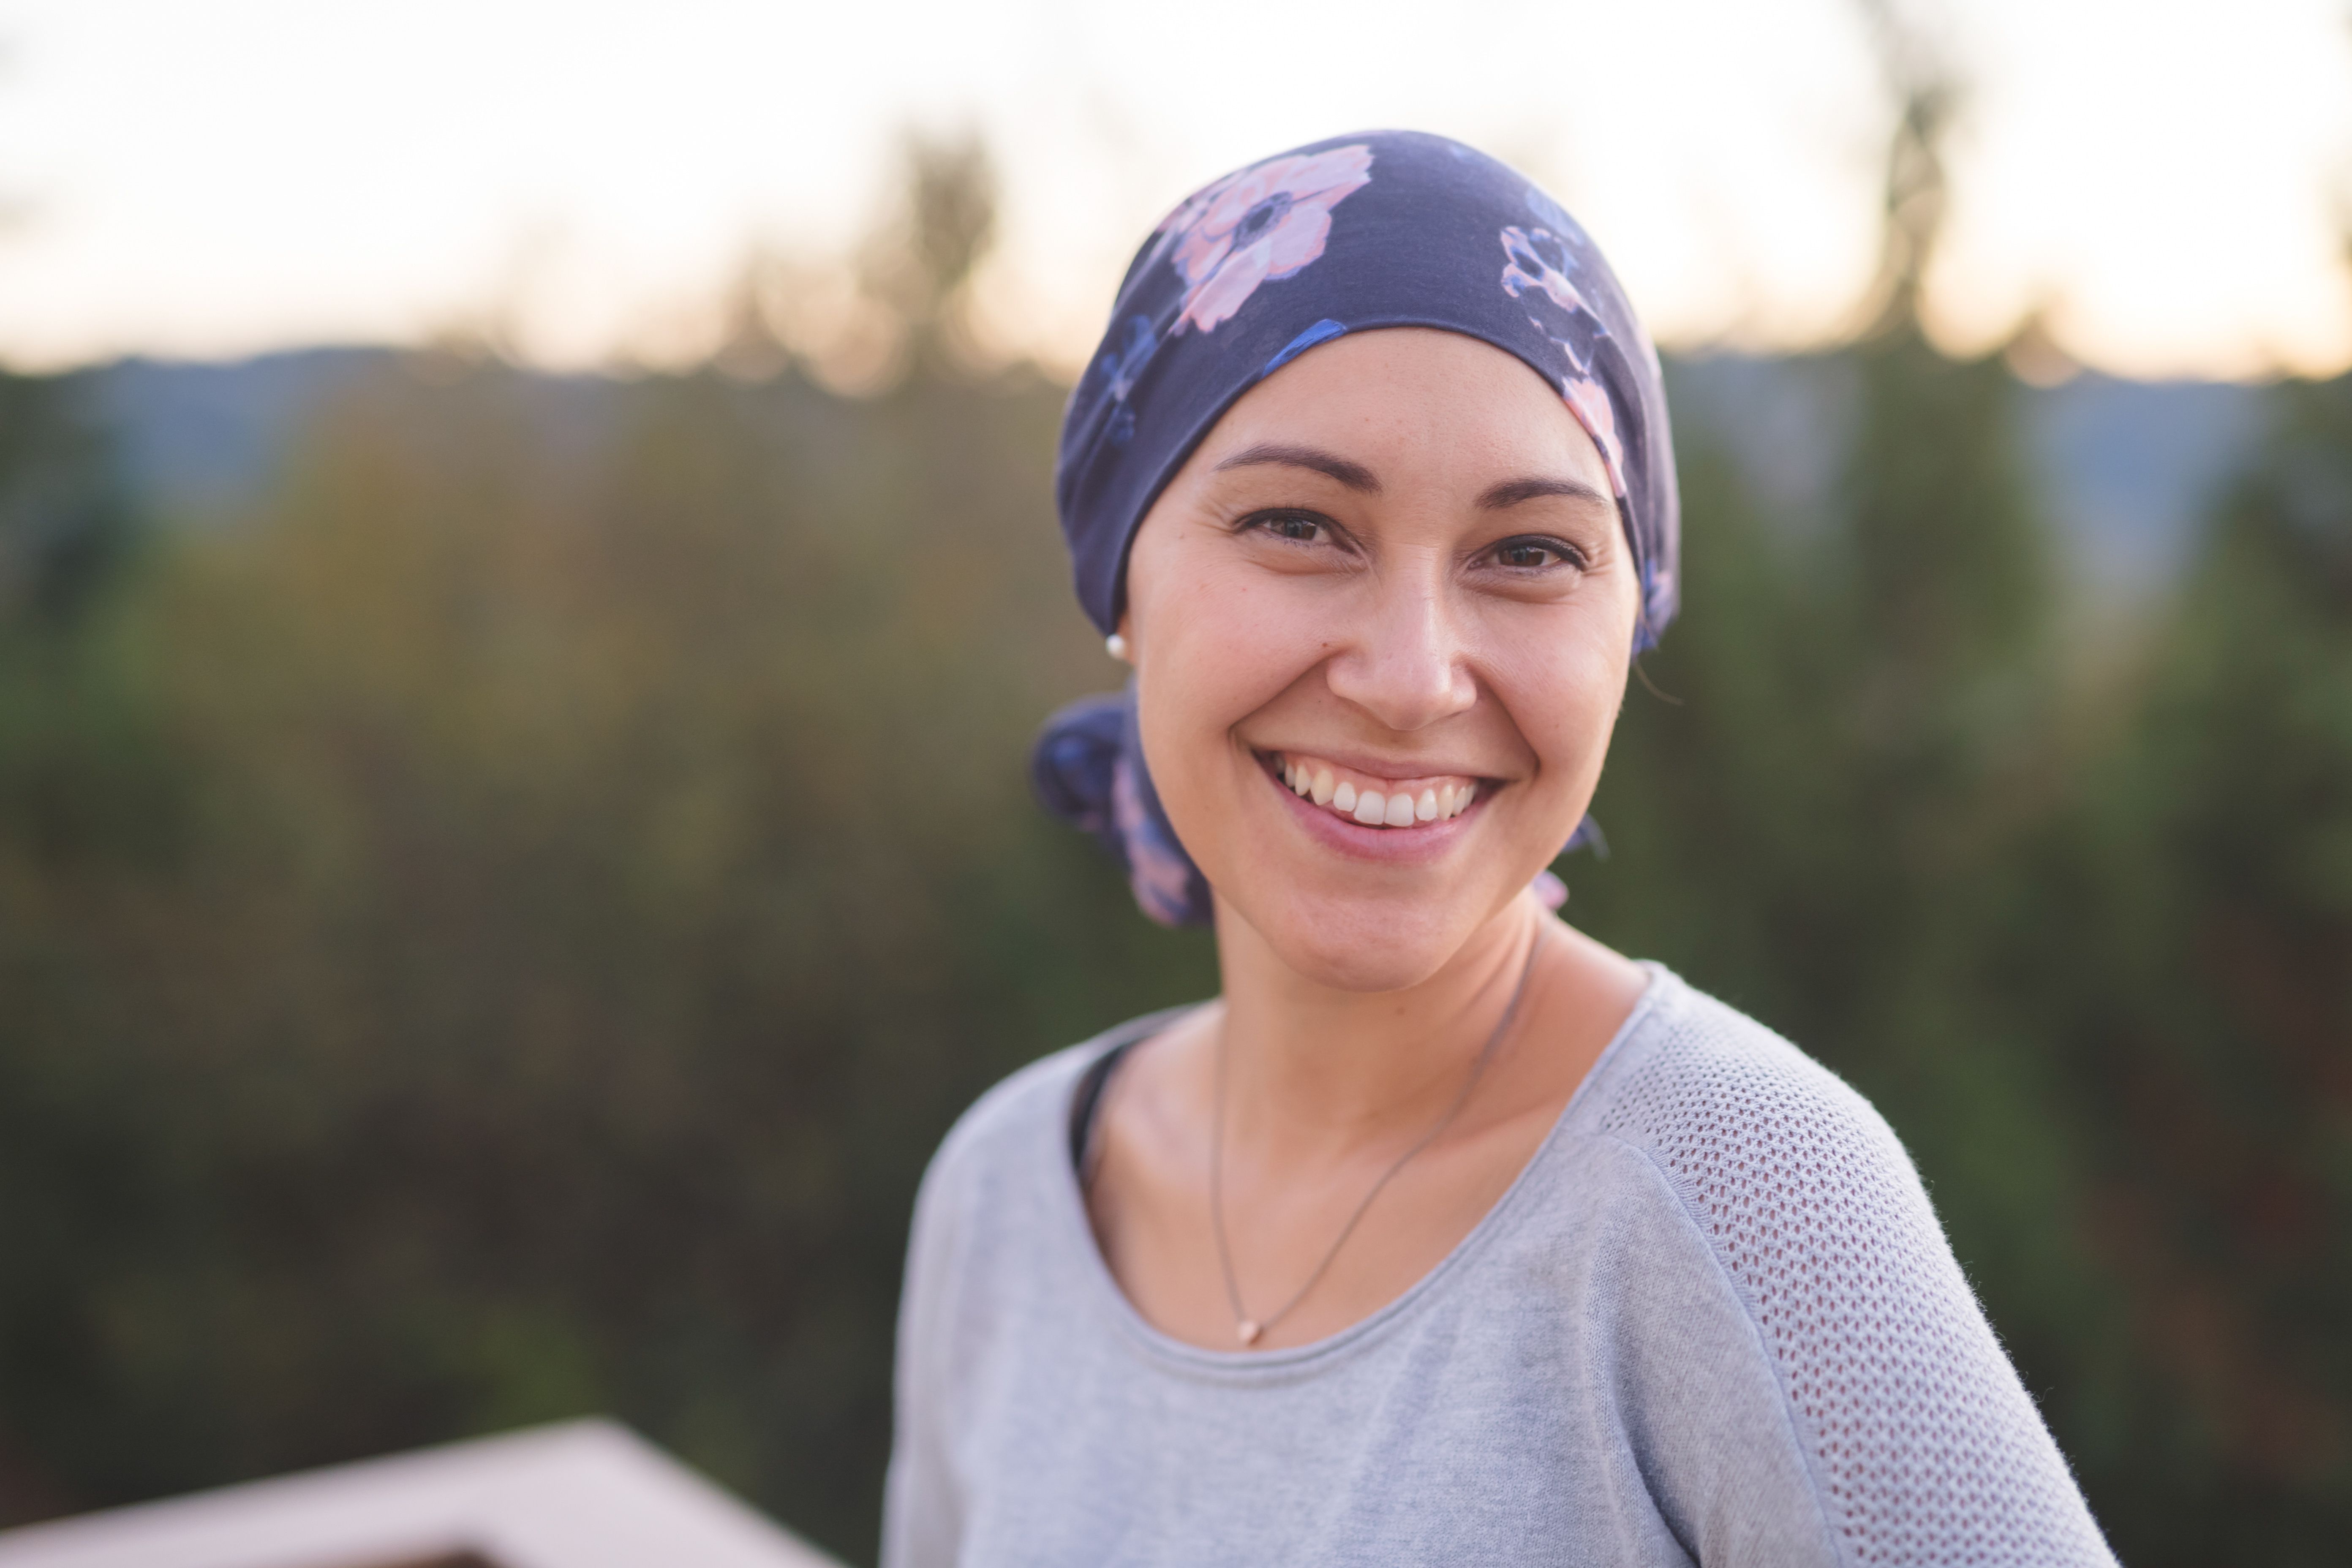 10 MORE Free Resources for Cancer Patients You Probably Didn't Know About